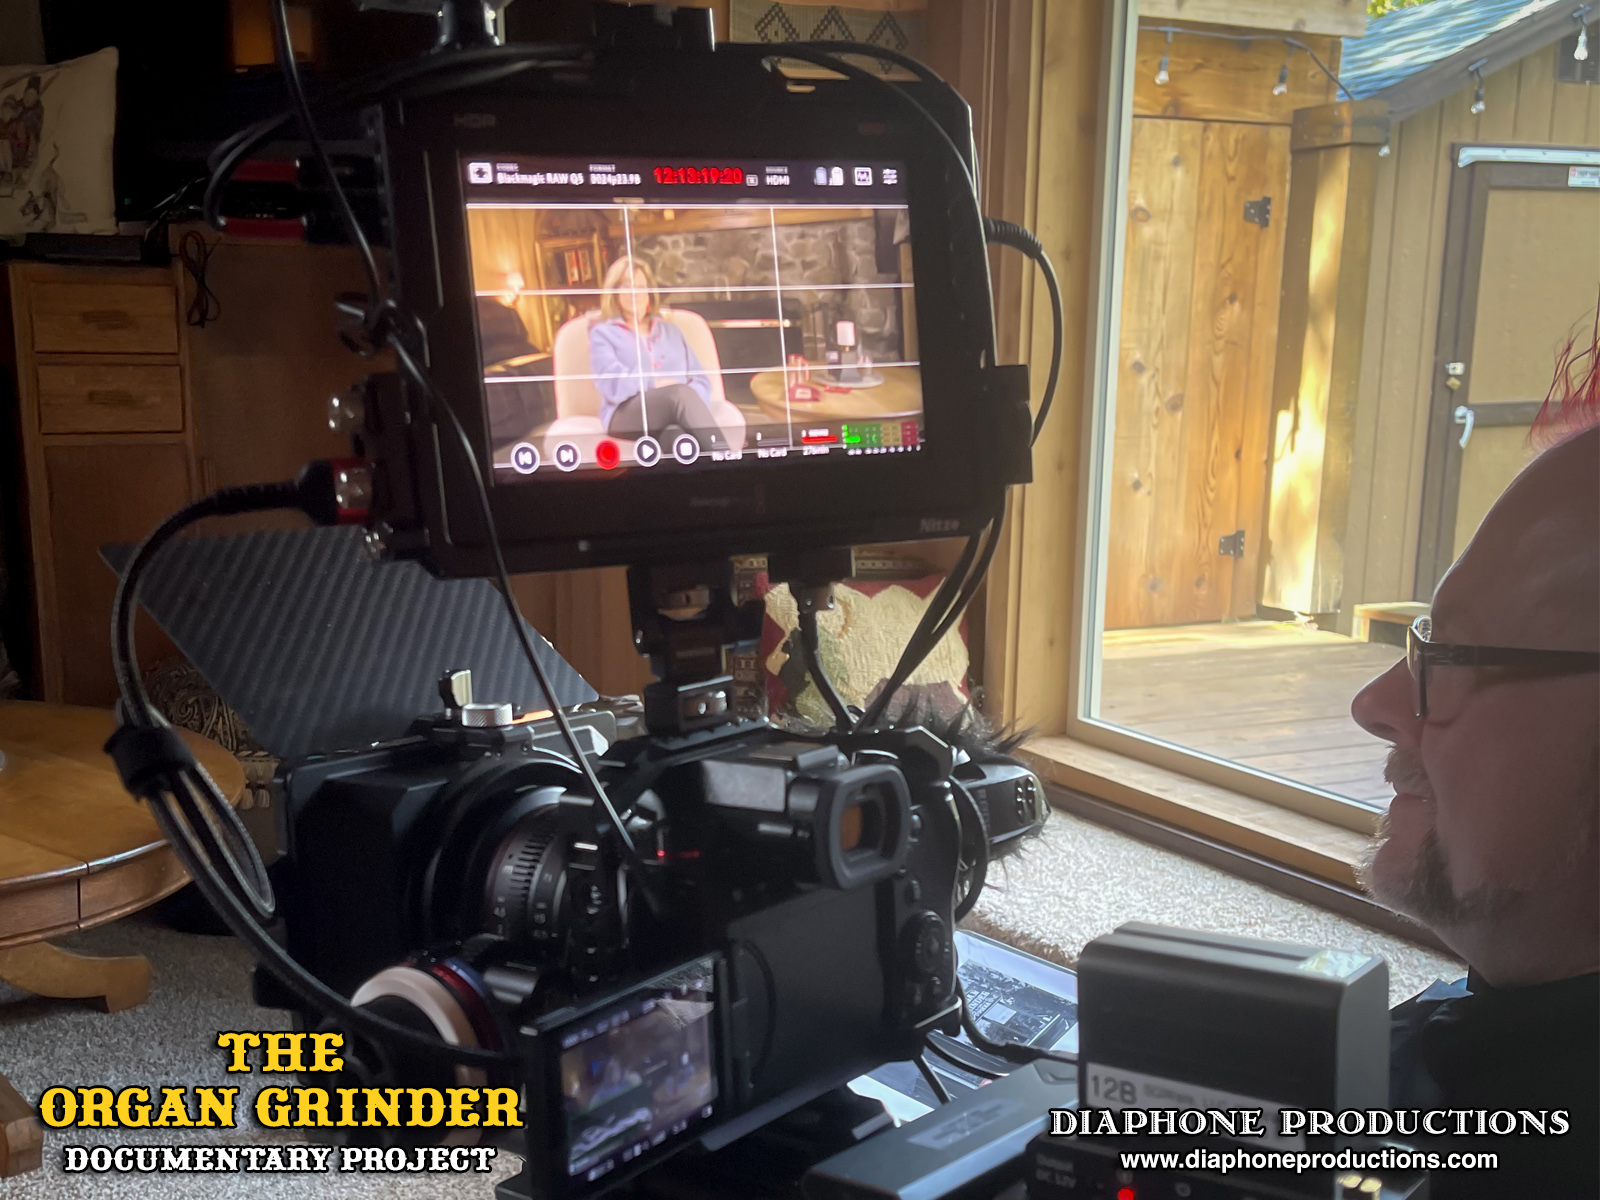 A behind-the-scenes photo of a cinema camera rig in Vicki Buck's rustic cabin living room. The camera monitor shows Vicki sitting in a chair.